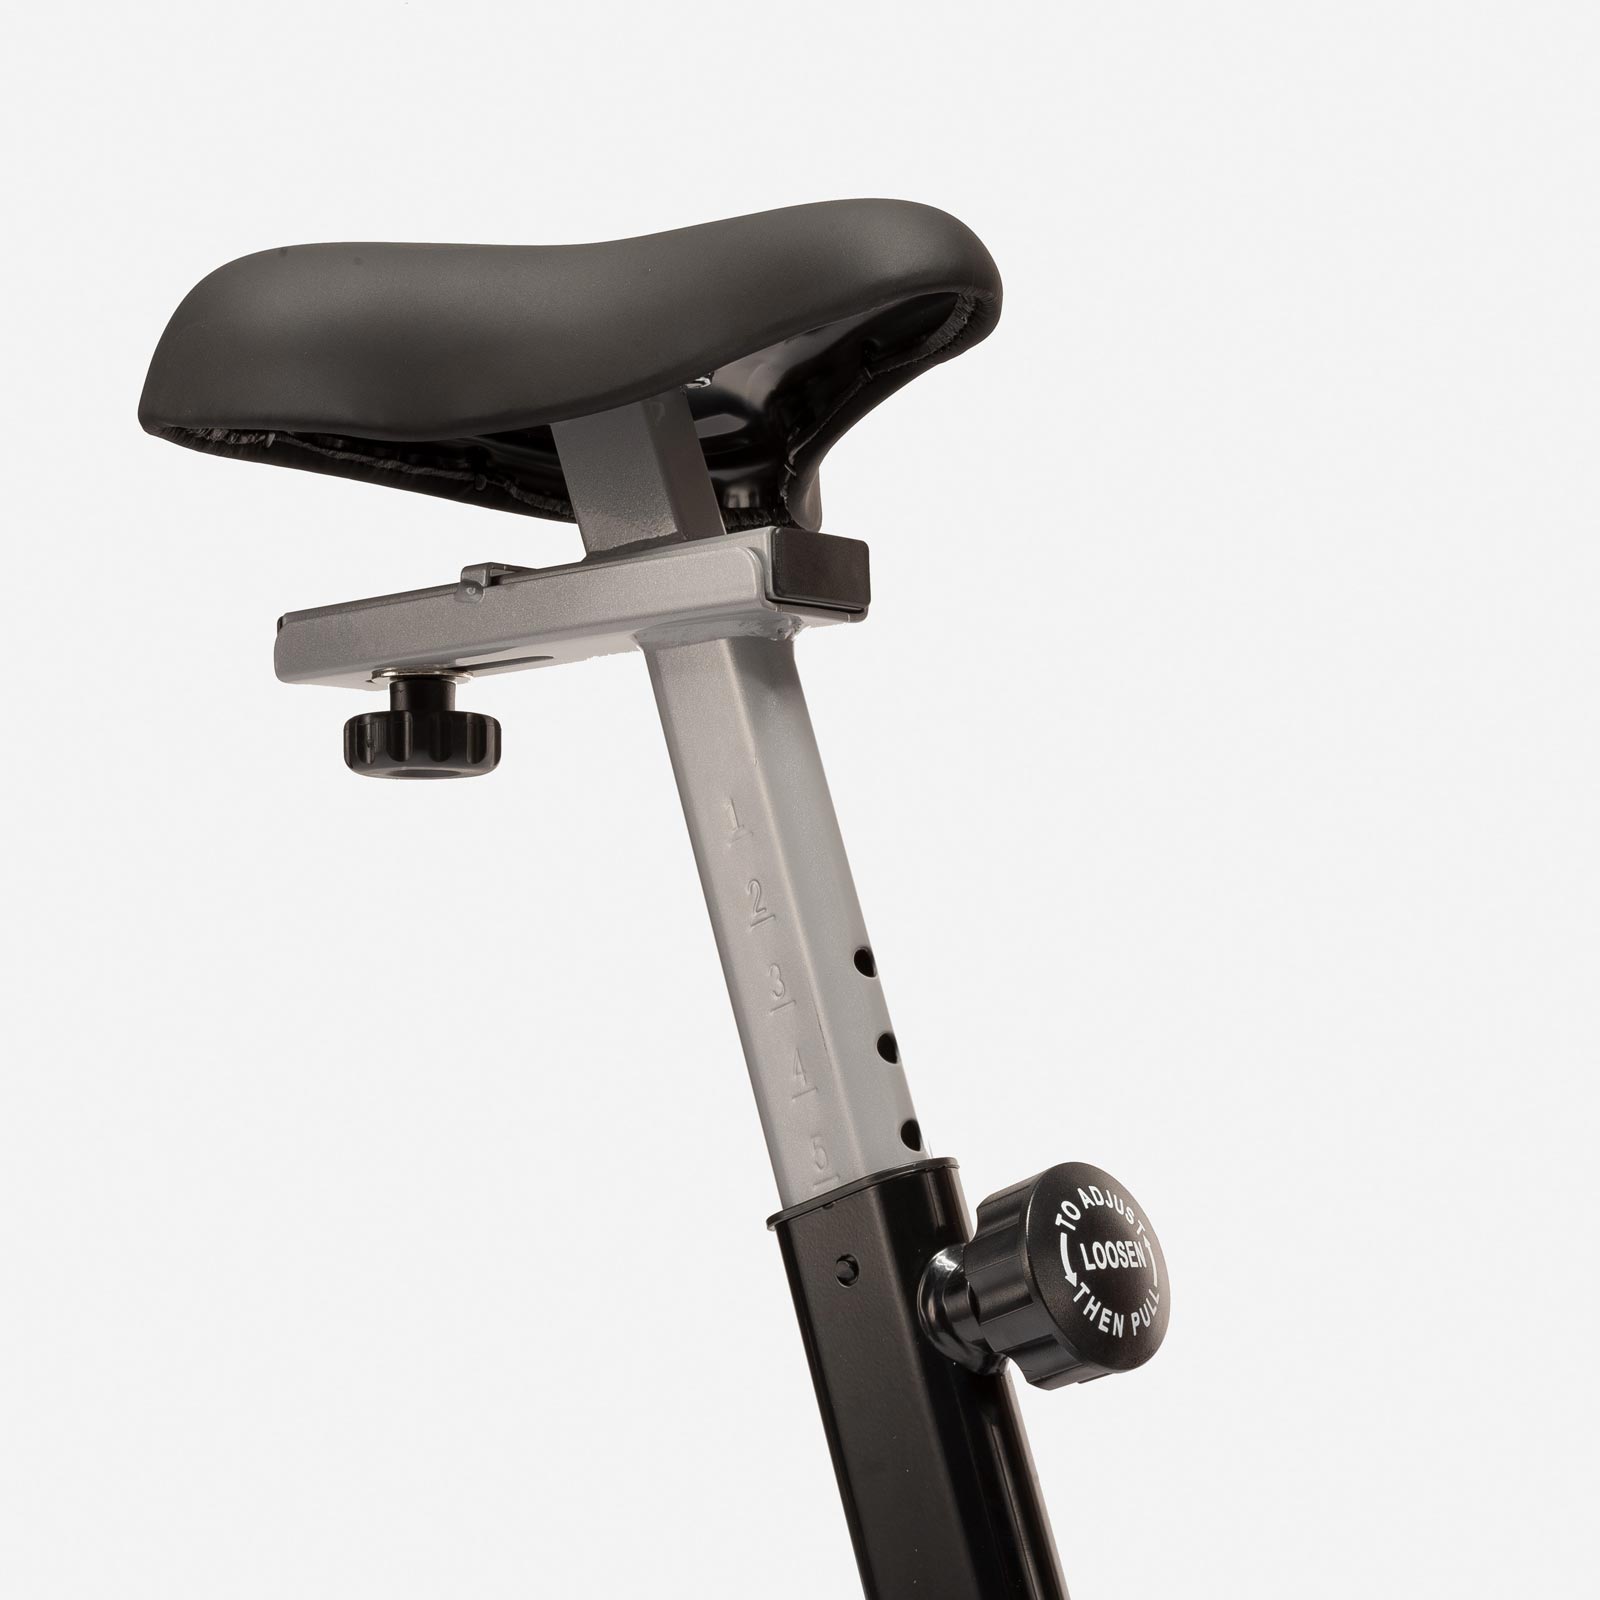 ROTOCYCLE SP-250 SPIN BIKE